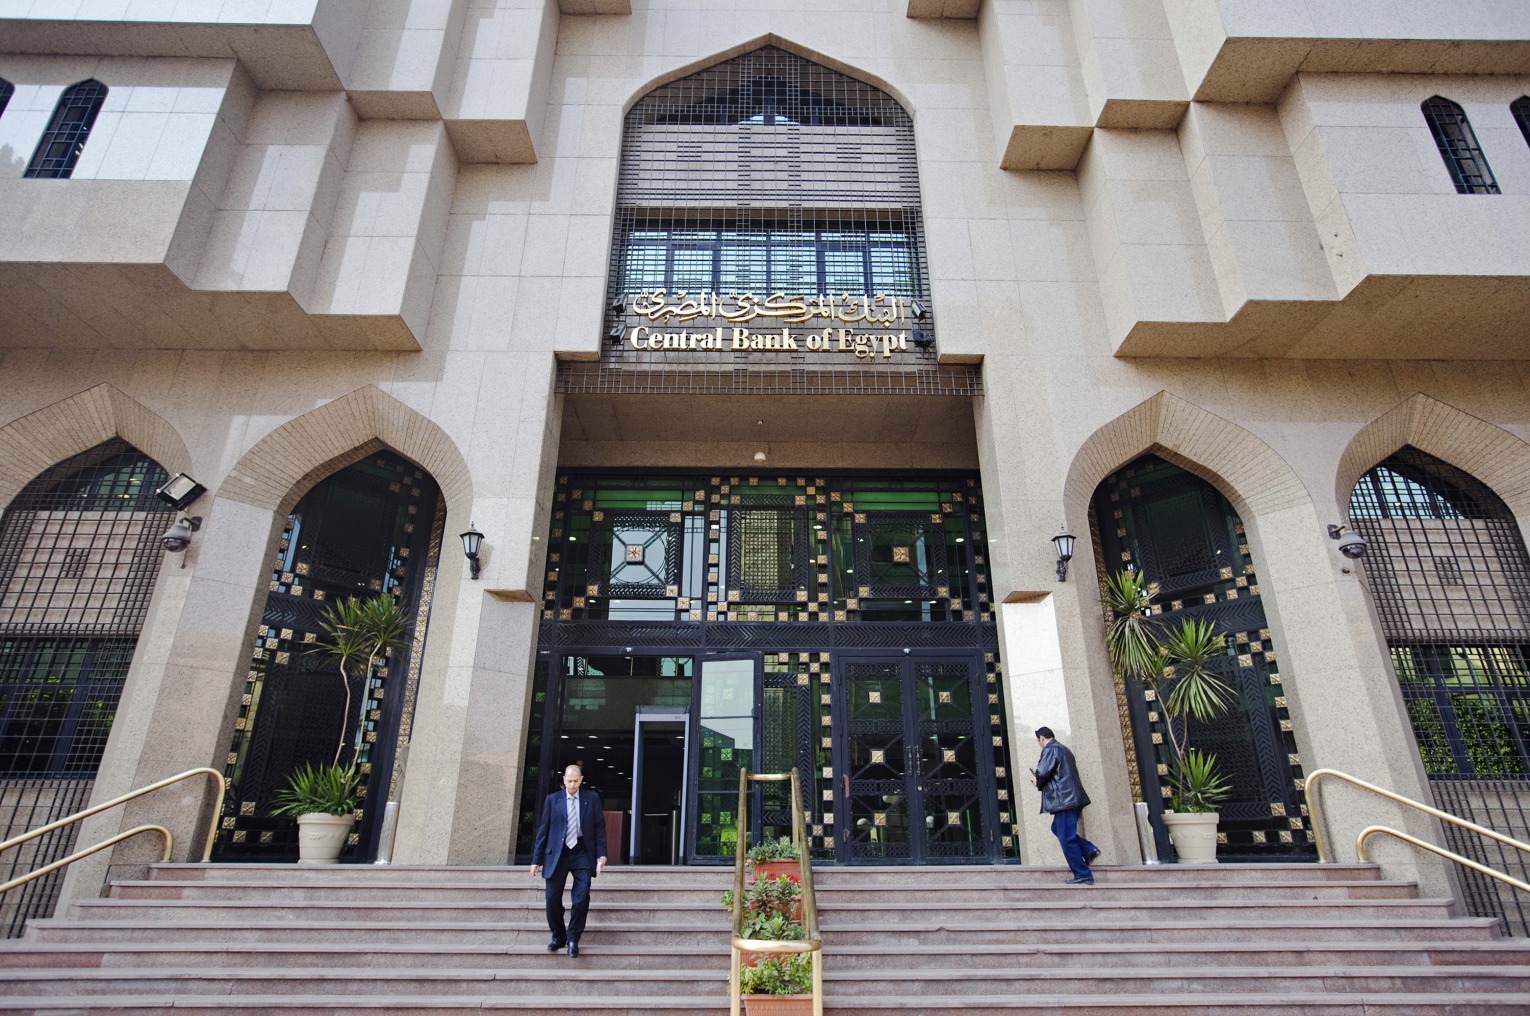 Egypt's central bank in Cairo.